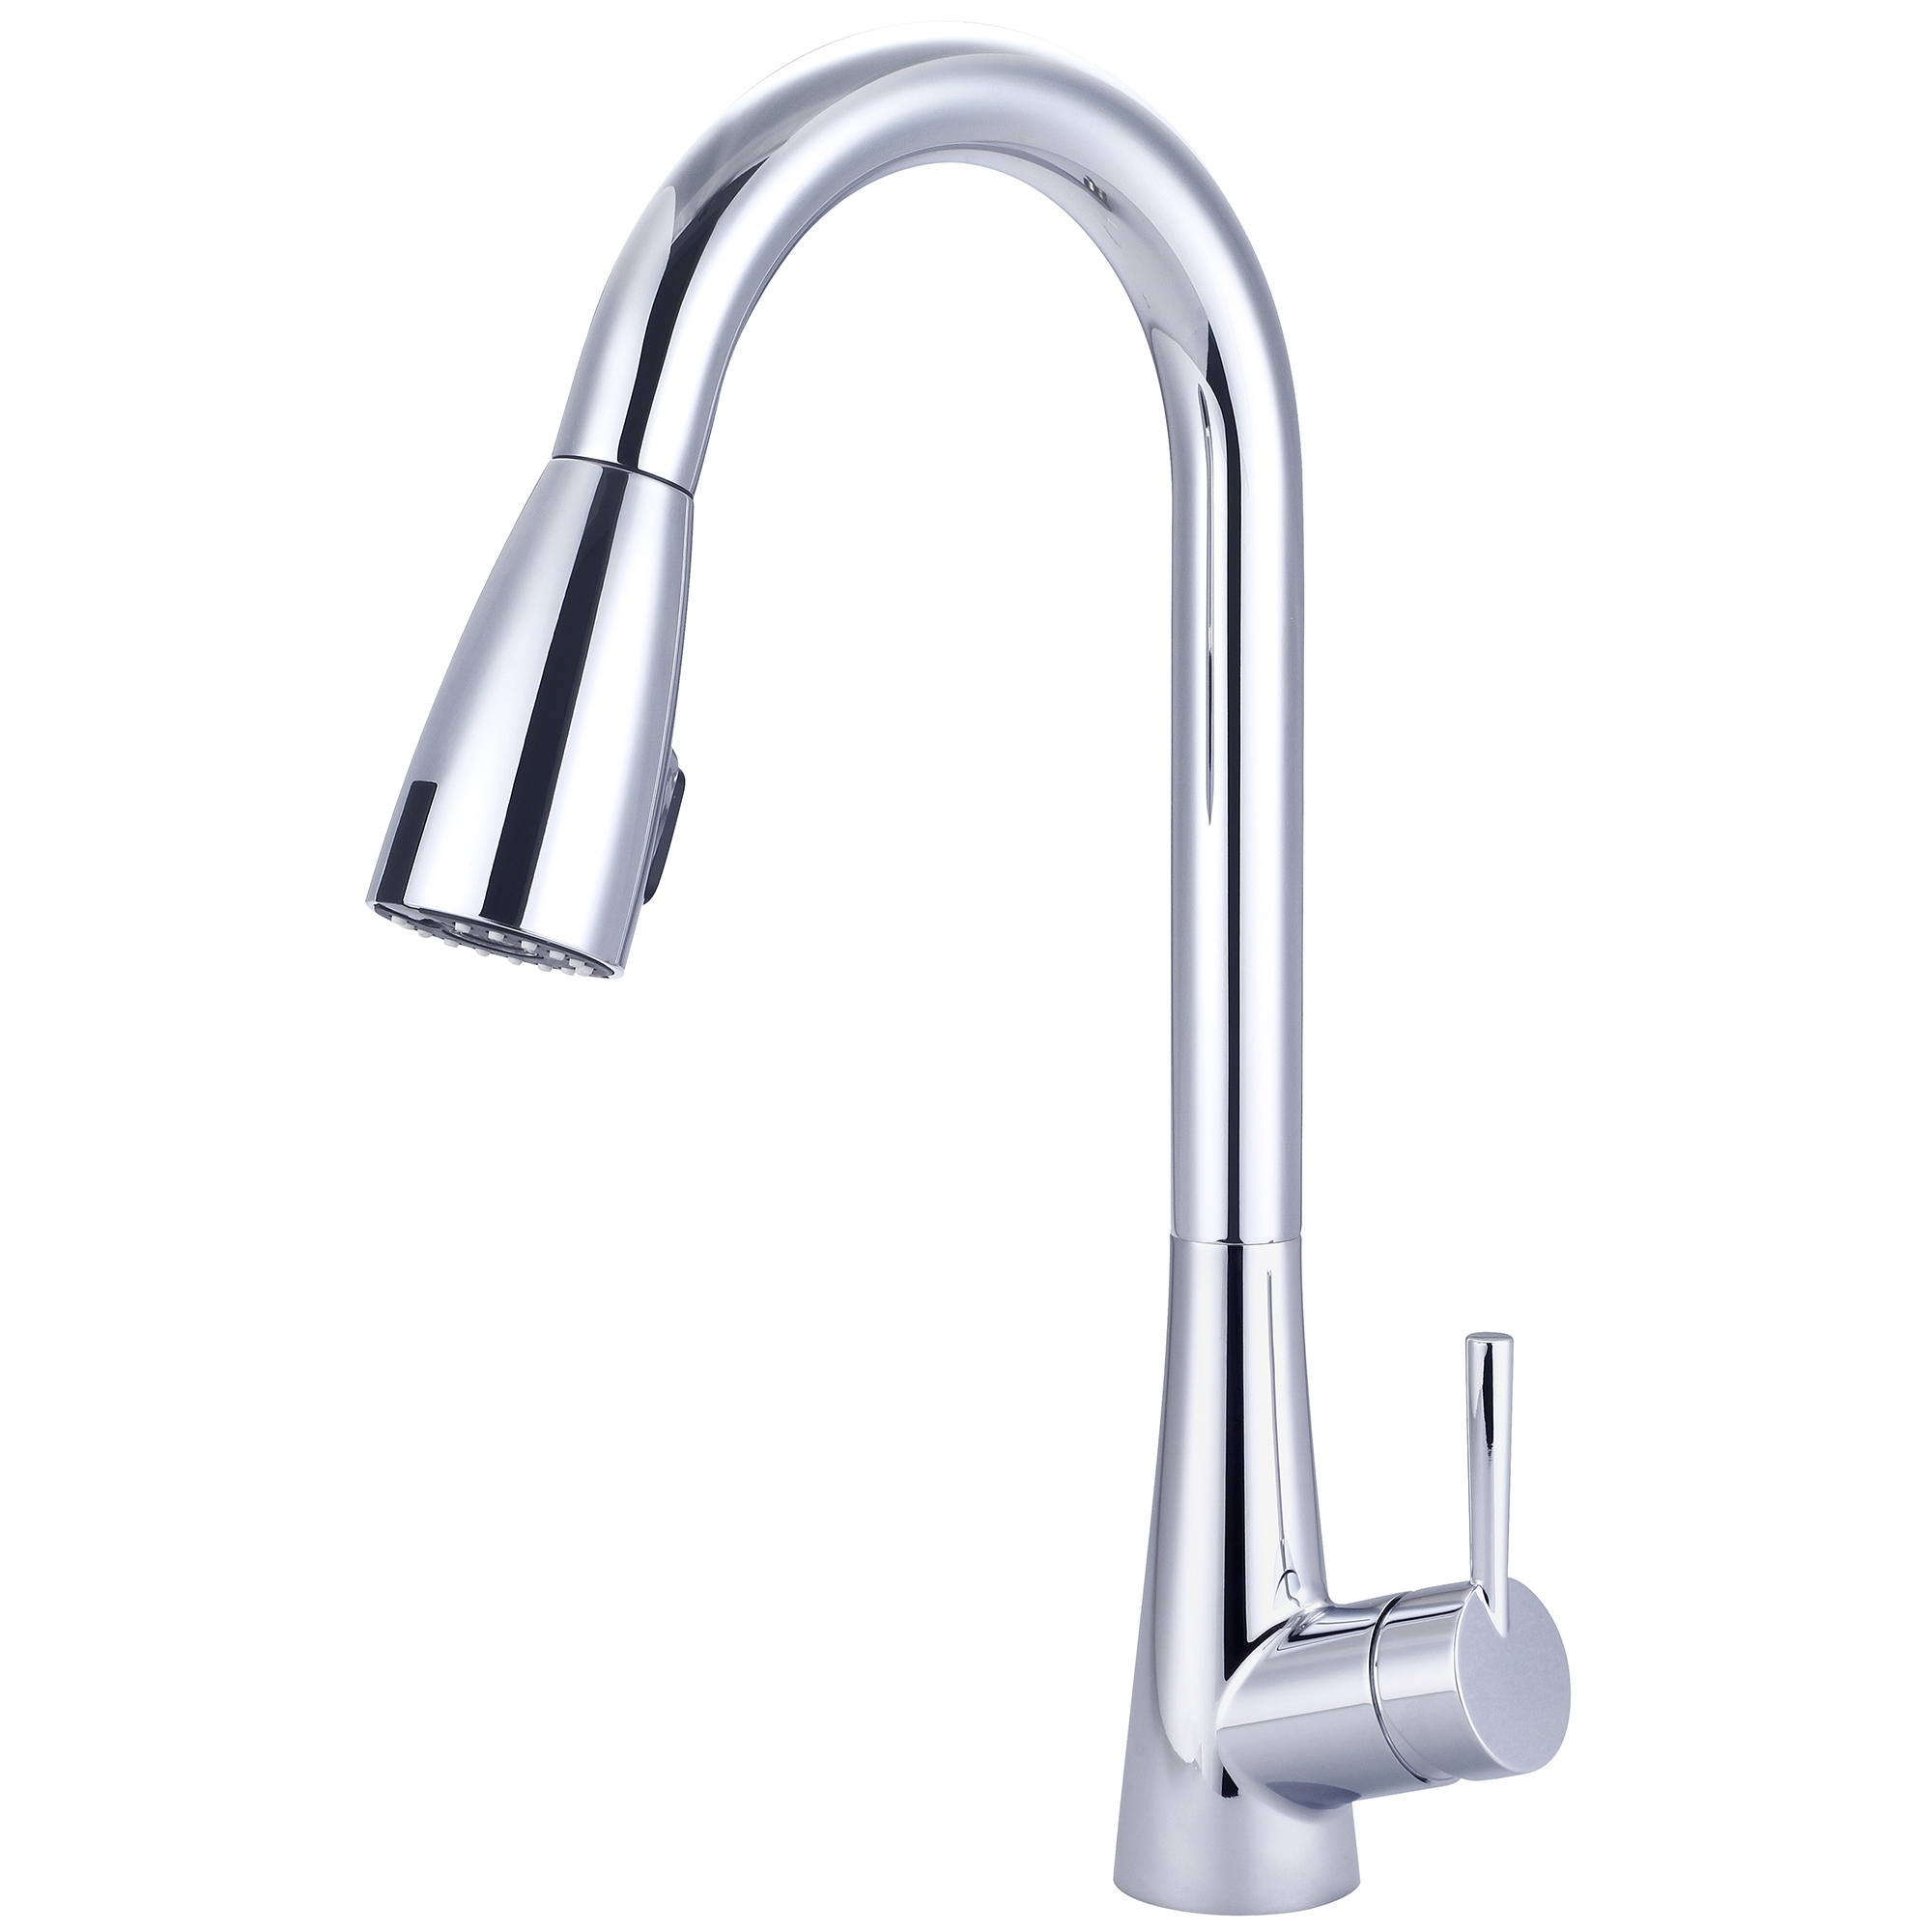 Olympia i2 Single Handle Touchless Sensor Pull-Down Kitchen Faucet